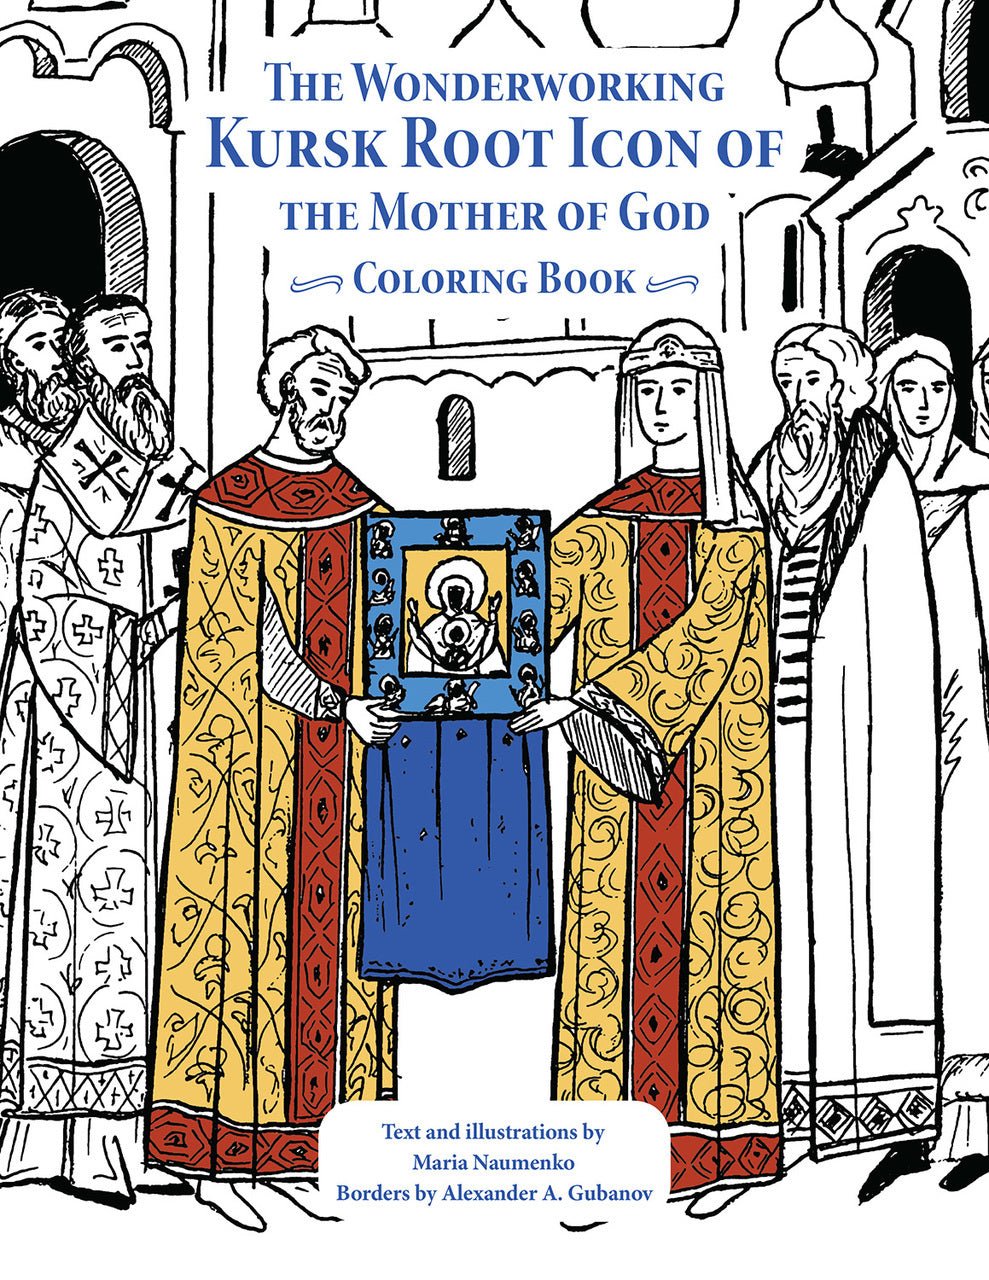 Coloring Book - The Wonderworking Kursk Root Icon of the Mother of God - Holy Cross Monastery